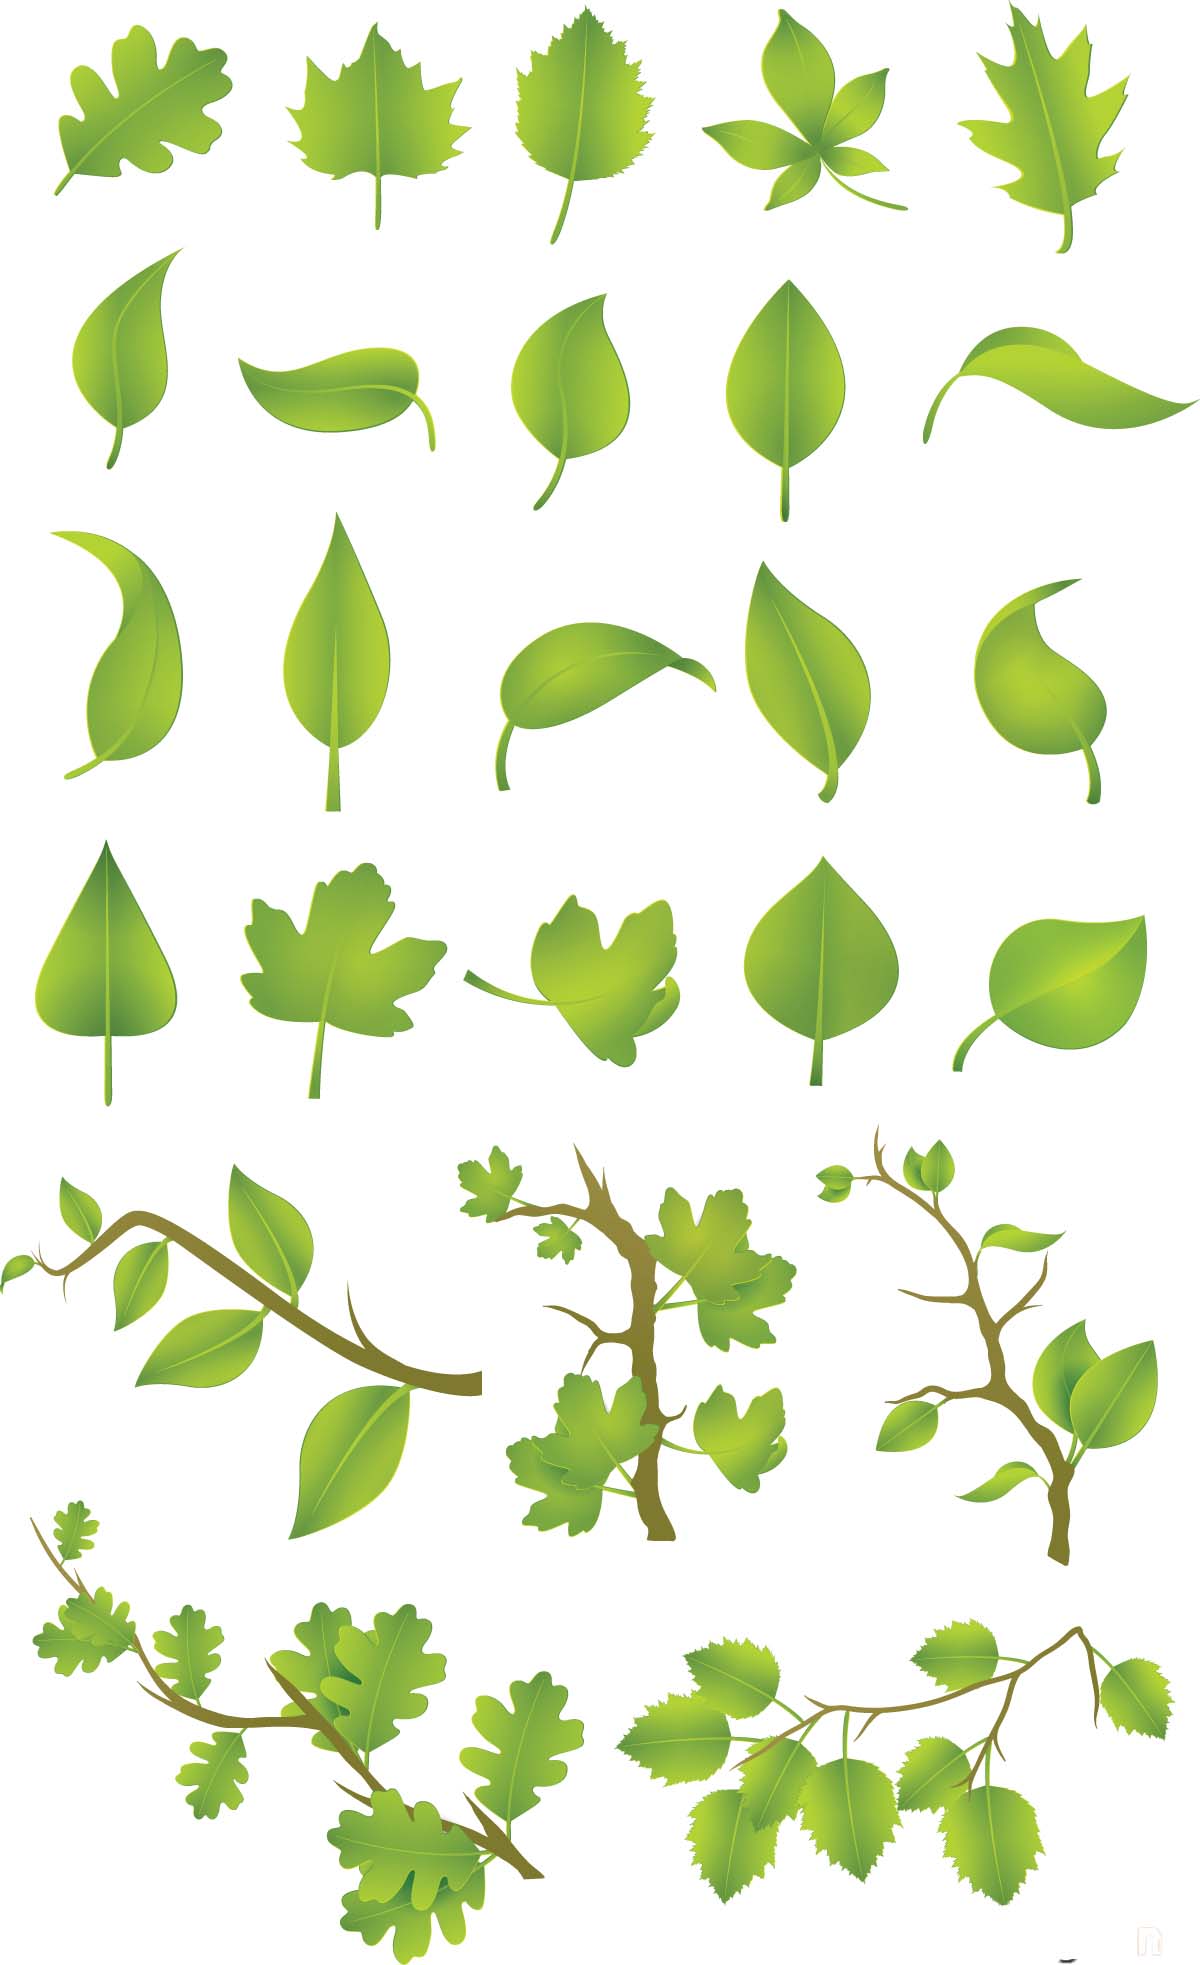 Green leaves vector set | Free download